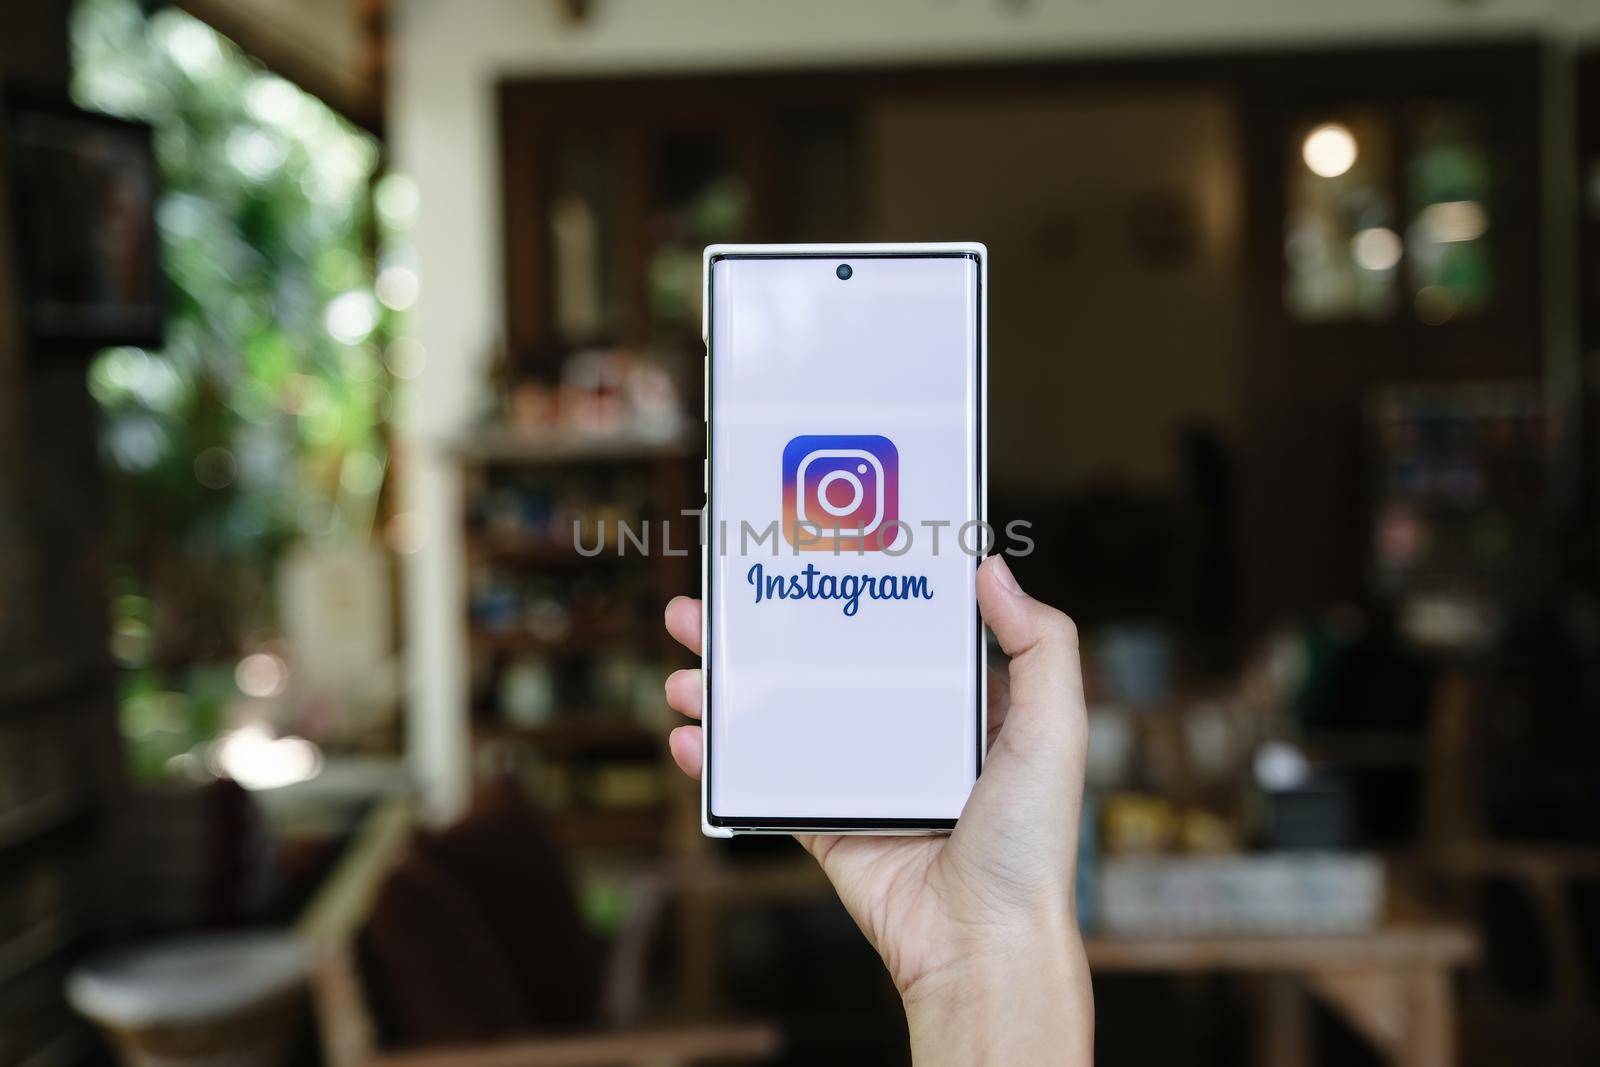 CHIANGMAI, THAILAND - July 09, 2021: A woman holding smartphone with Instagram application on the screen. Instagram is a photo sharing app for smartphones